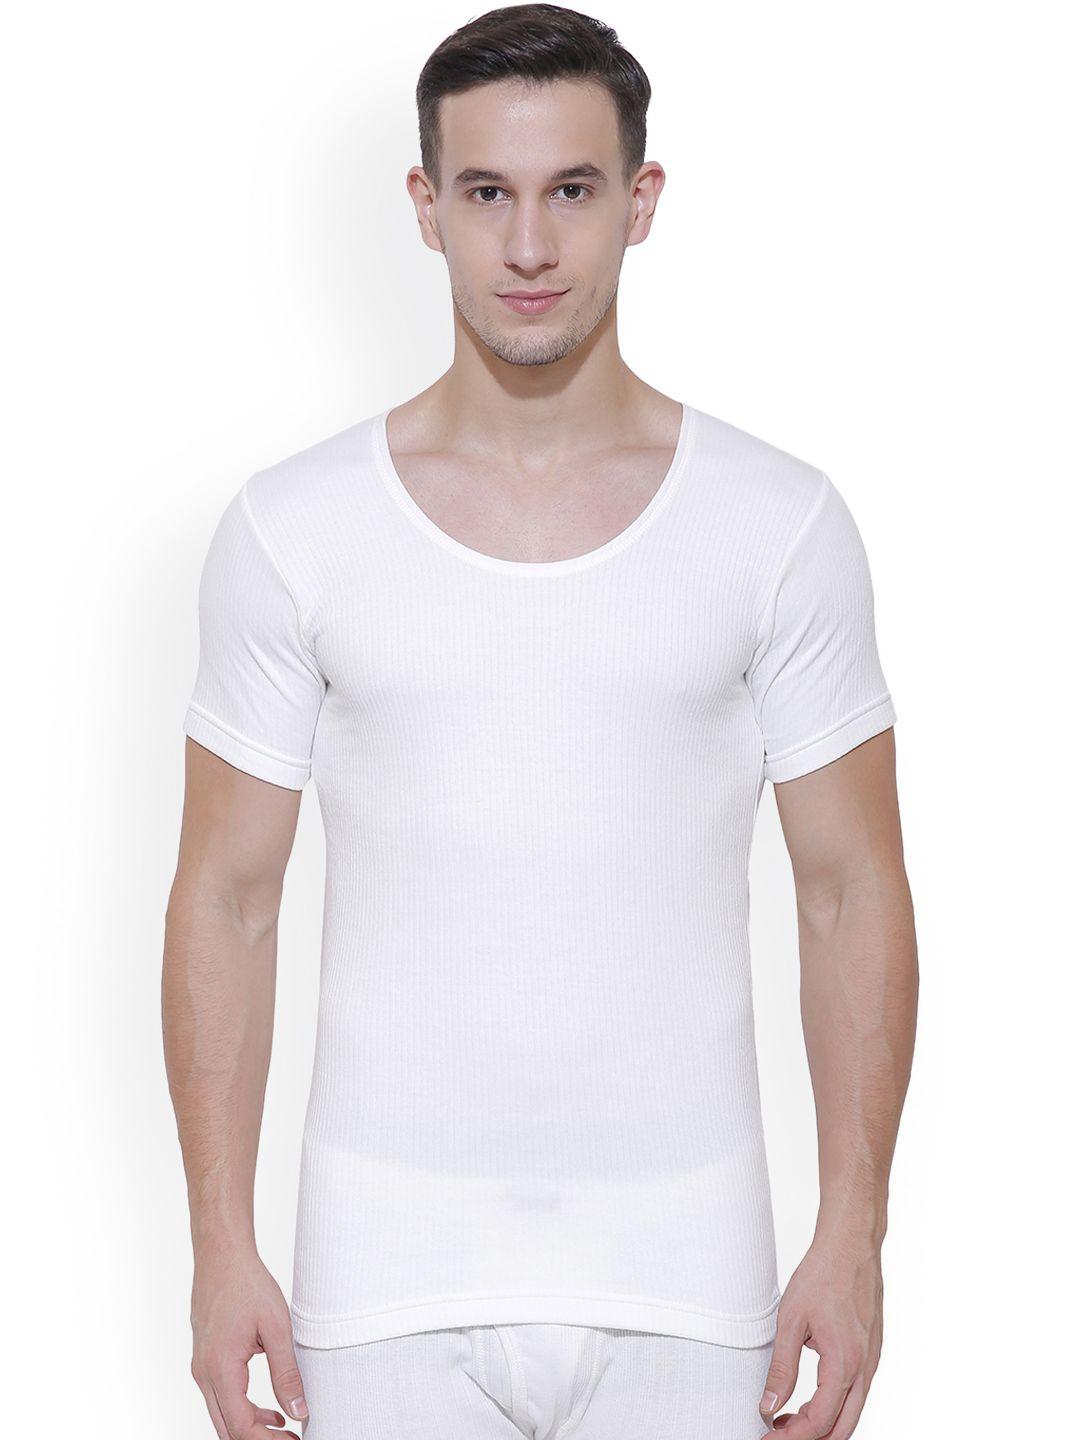 bodycare insider men off white solid thermal top b106_80